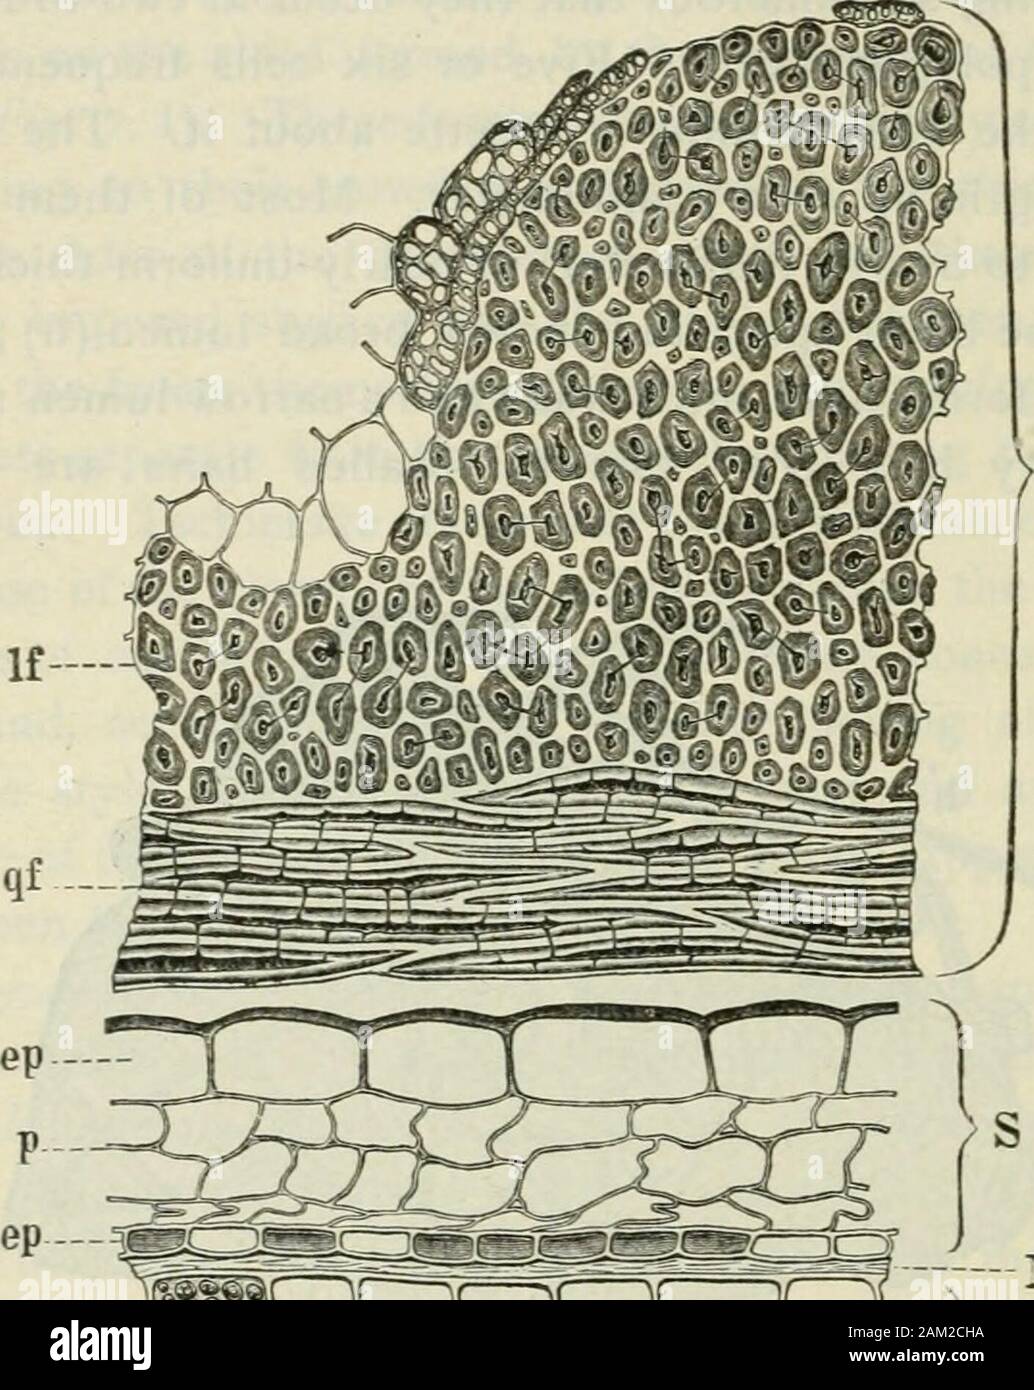 American journal of pharmacy . As with crystal clusters are com-mon, particularly near the base of the style. Reticulated cells occurin the inner layers adjoining the endocarp. (4) Outer Endocarp [Fig. 7, F, Fig. p, If).—Owing to the deepwrinkles the thickness ot this coat is exceedingly variable. As in. End lep — k — - - X Fig- 9-—R^d Raspberry. Endocarp and seed in transverse section. End,endocarp consisting of If, longitudinall extended fibers, and qf, transversly ex-tended fibers ; S, testa consisting of ep, epidermis, p. parenchyma (nutritivelayer) and iep, inner epidermis ; N, hyaline la Stock Photo